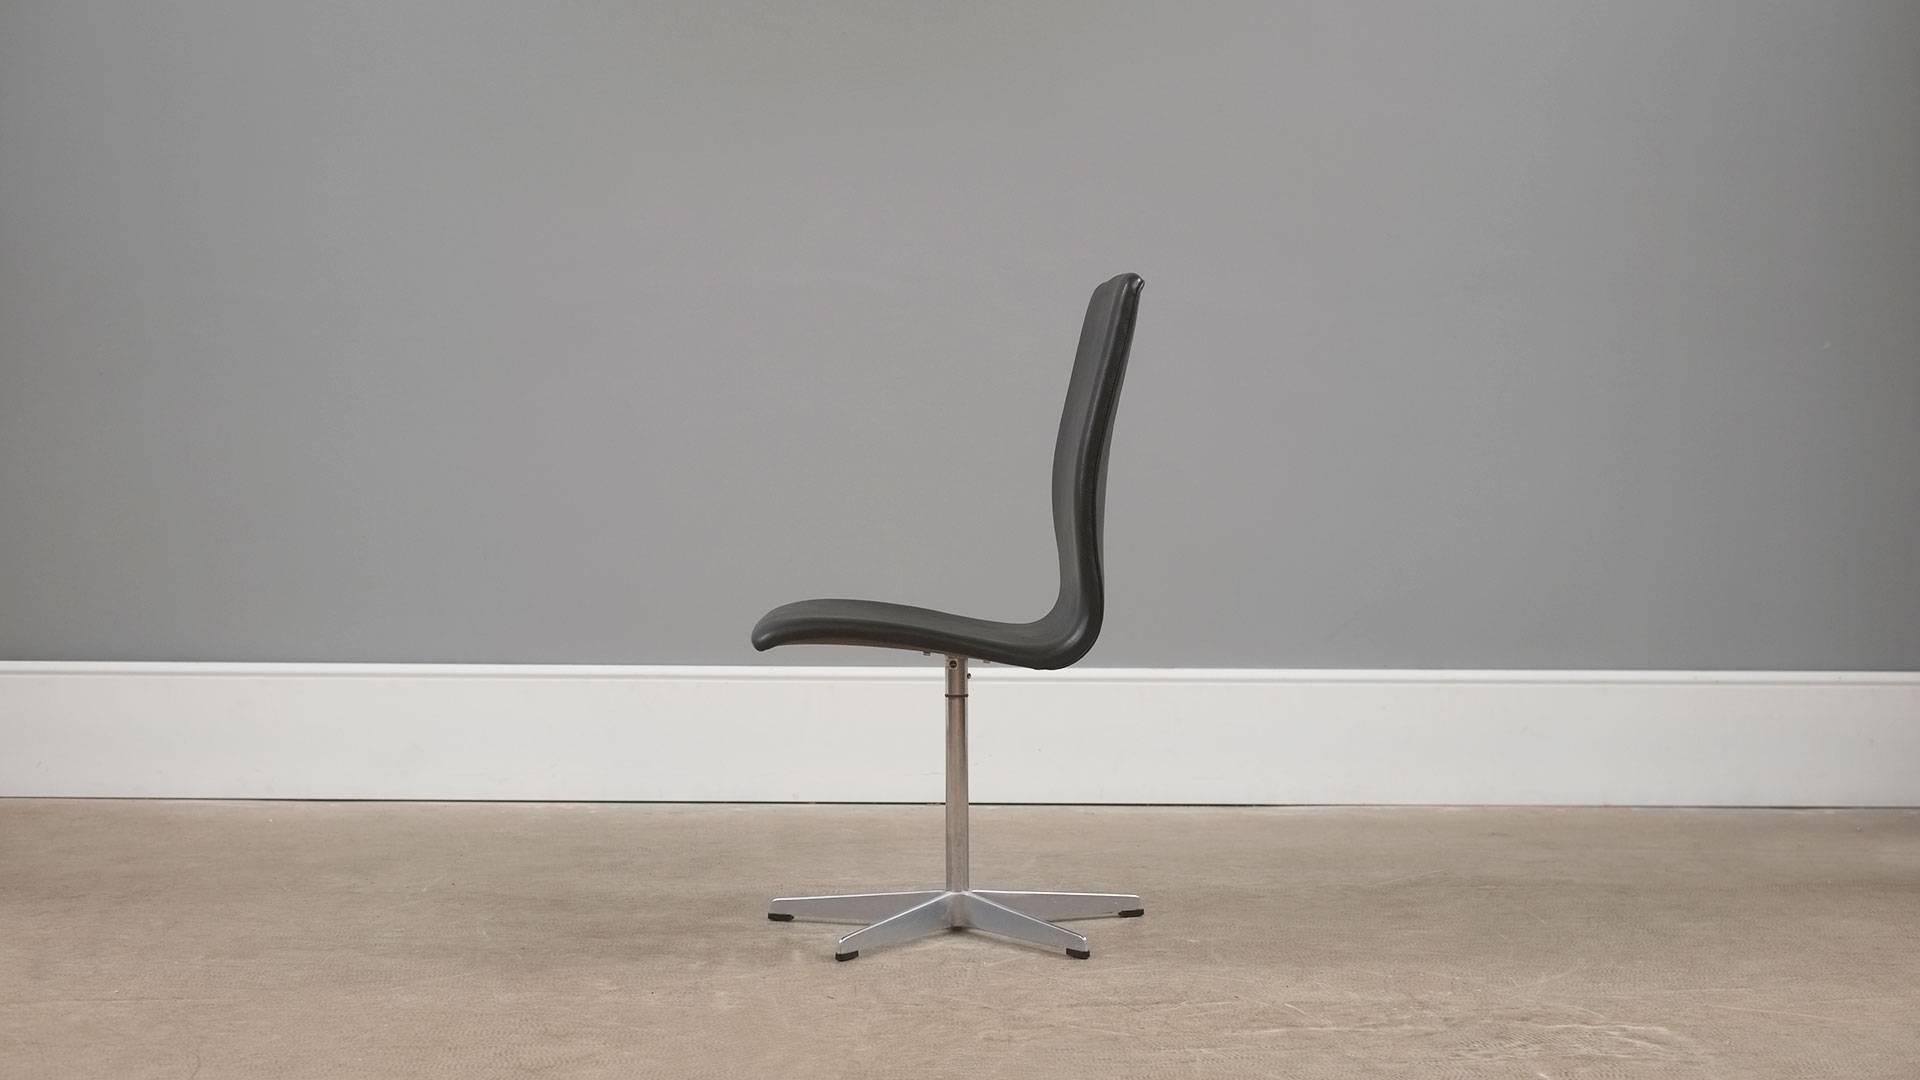 Ultra elegant early Oxford chair in beautiful patinated old leather designed by Arne Jacobsen for Fritz Hansen, Denmark. This example produced in 1971.